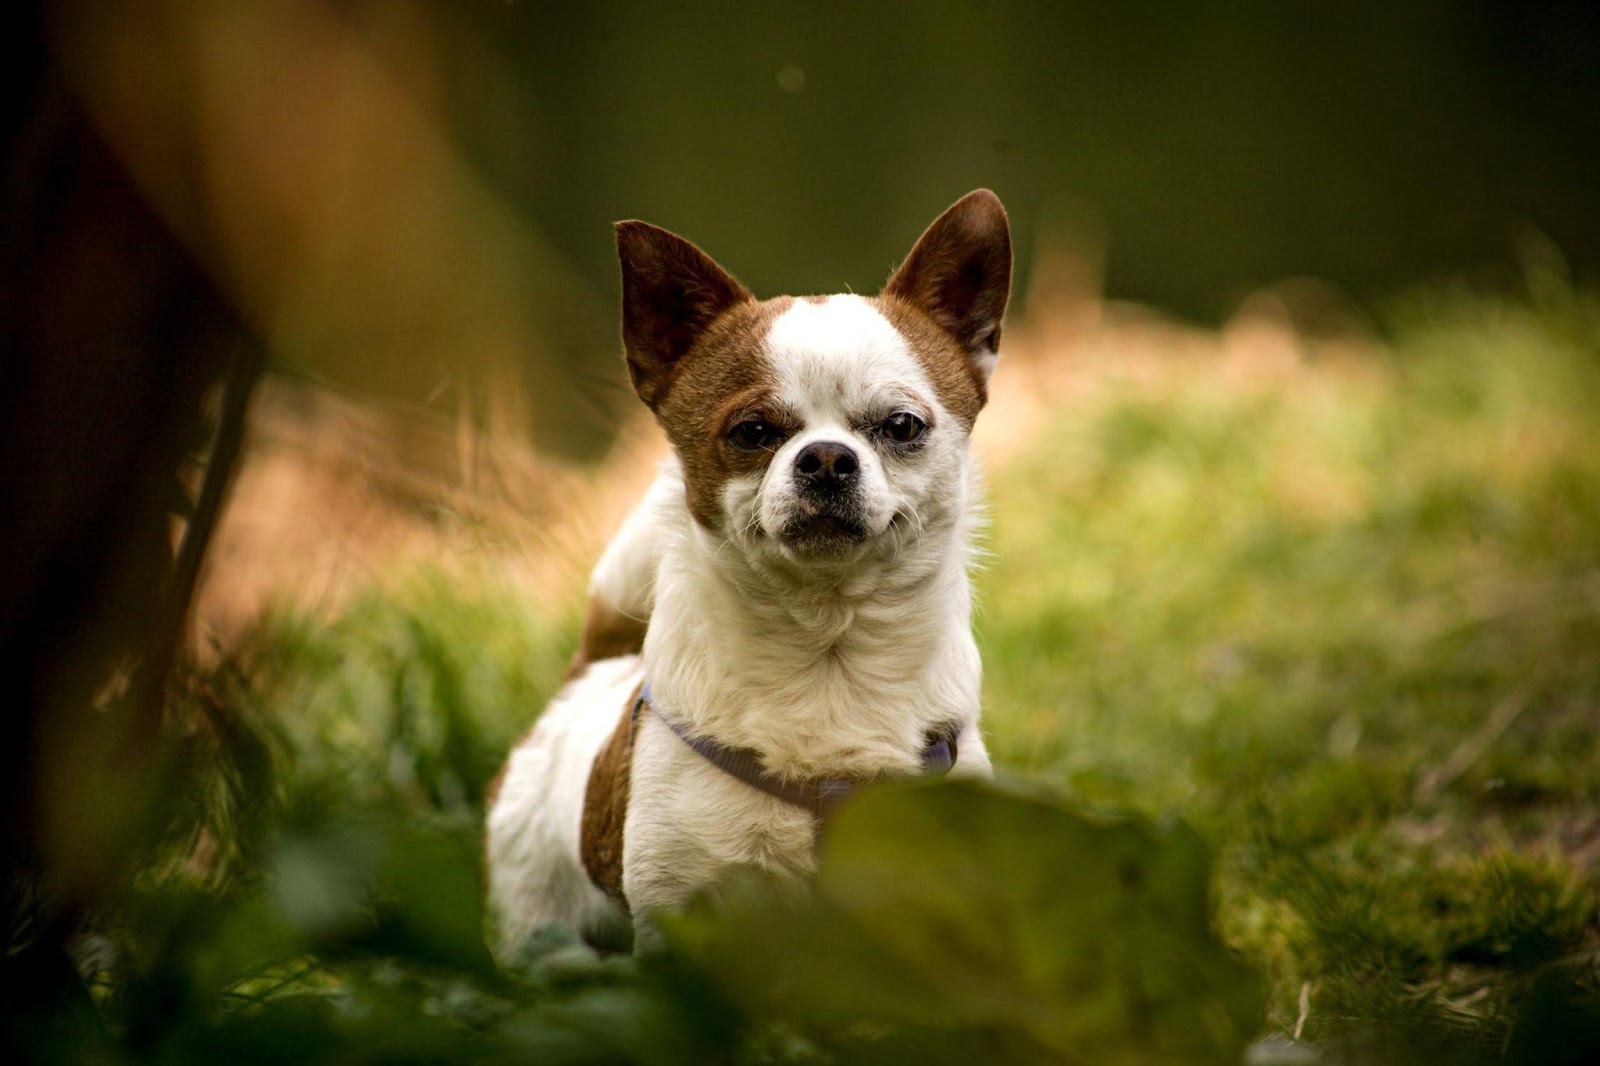 Small brown and white dog on grass